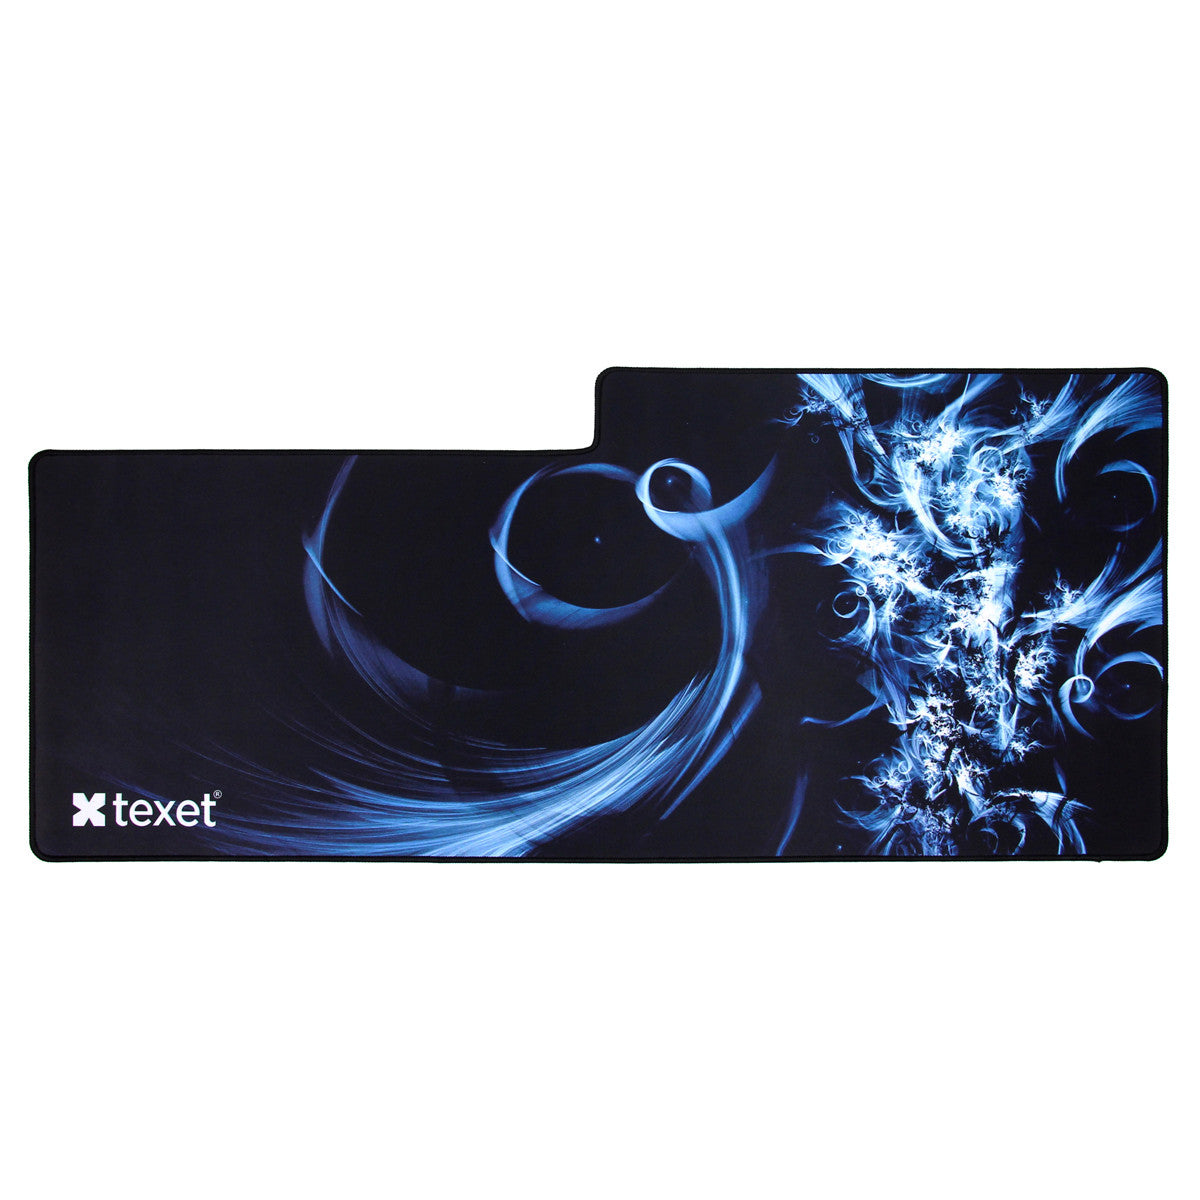 XXXL Gaming Mouse Pad